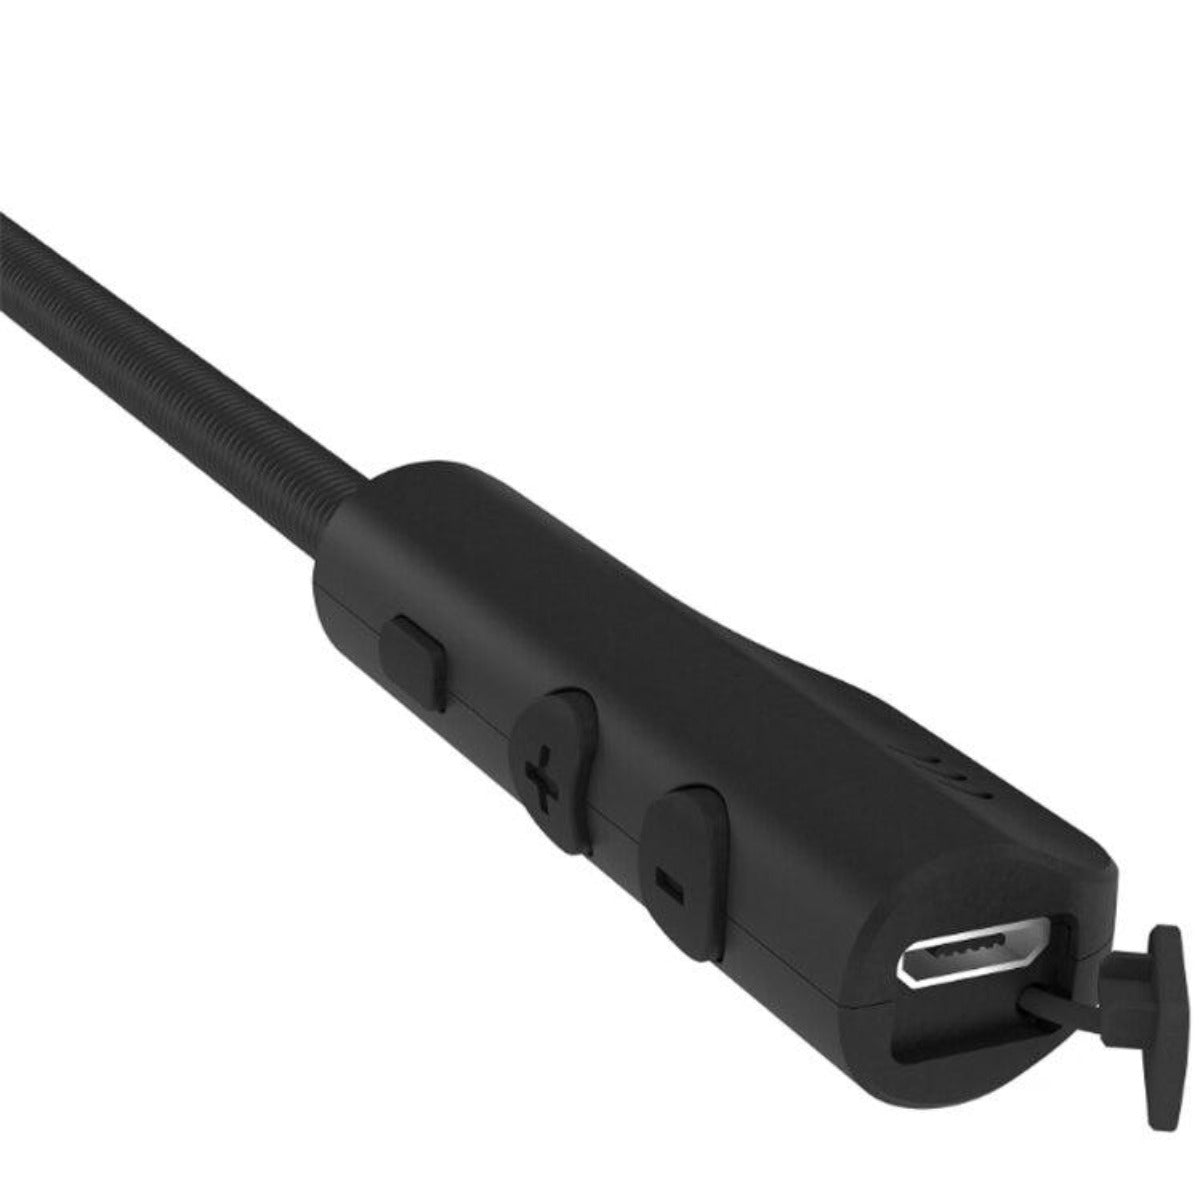 A black usb cable with a plug attached to it, perfect for connecting an intercom or Moto Helmet Bluetooth Wireless Headset to a motorcycle.